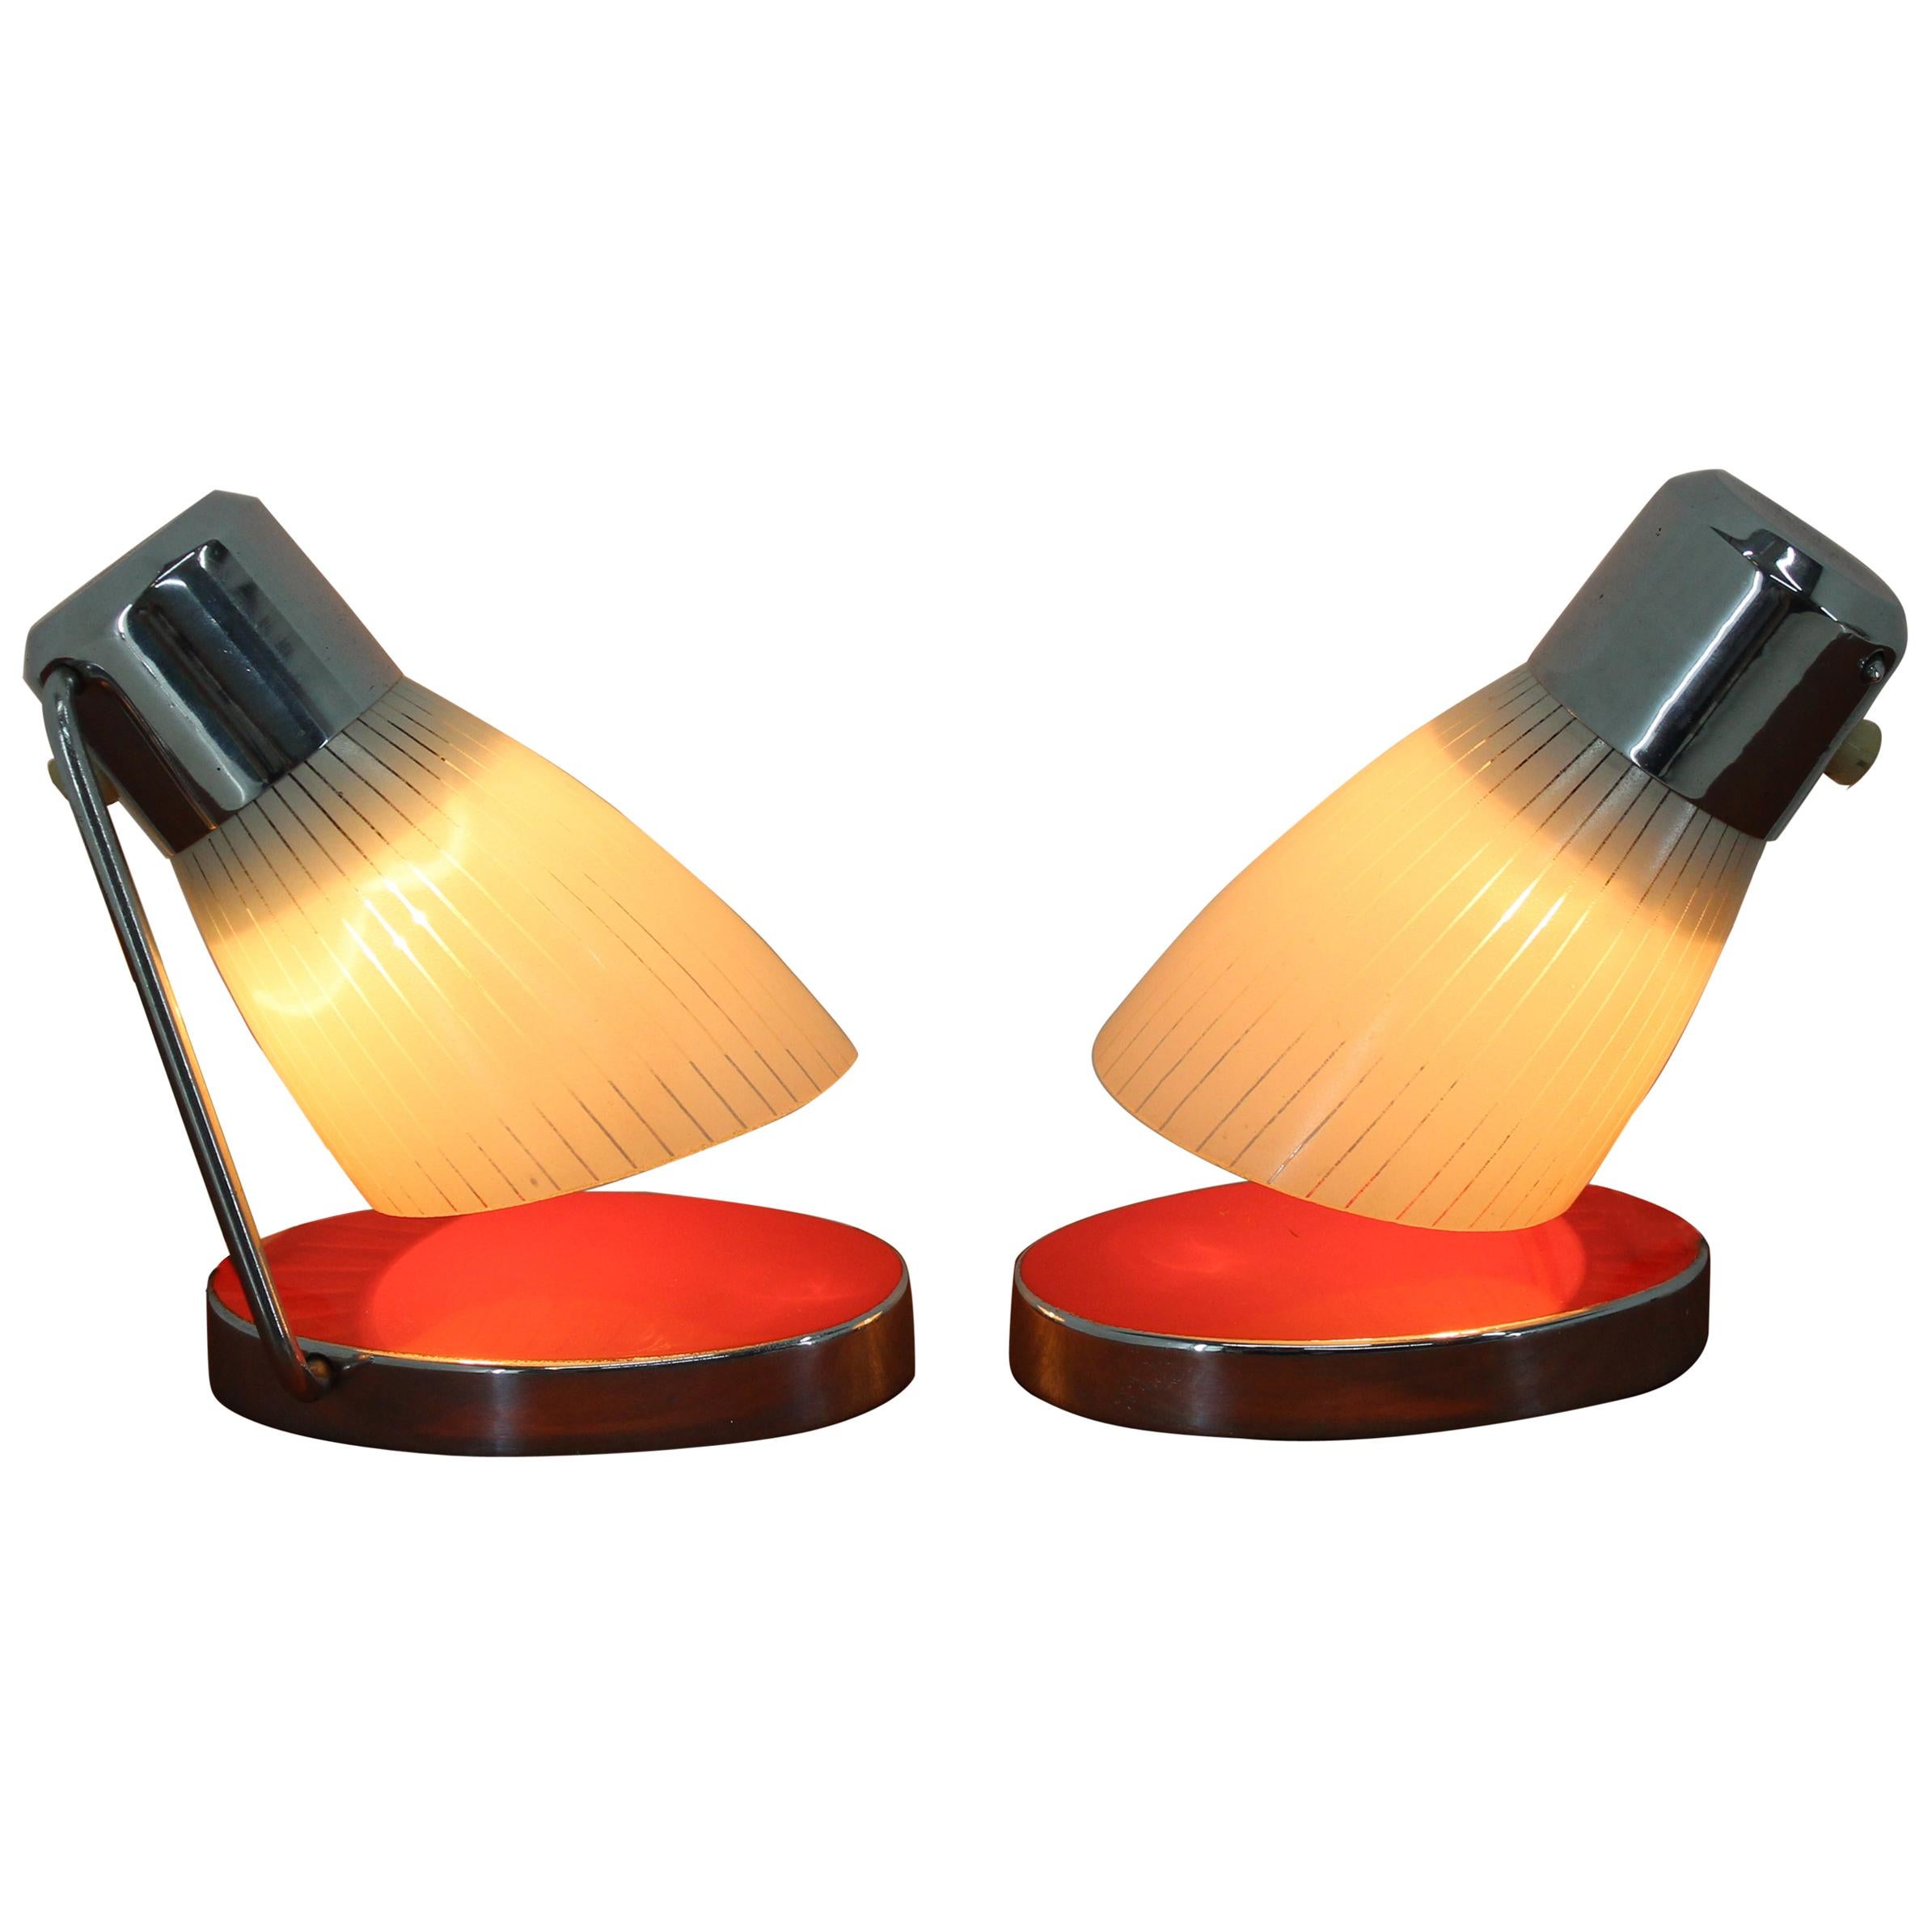 Pair of Midcentury Table Lamps by Drupol, 1960s For Sale